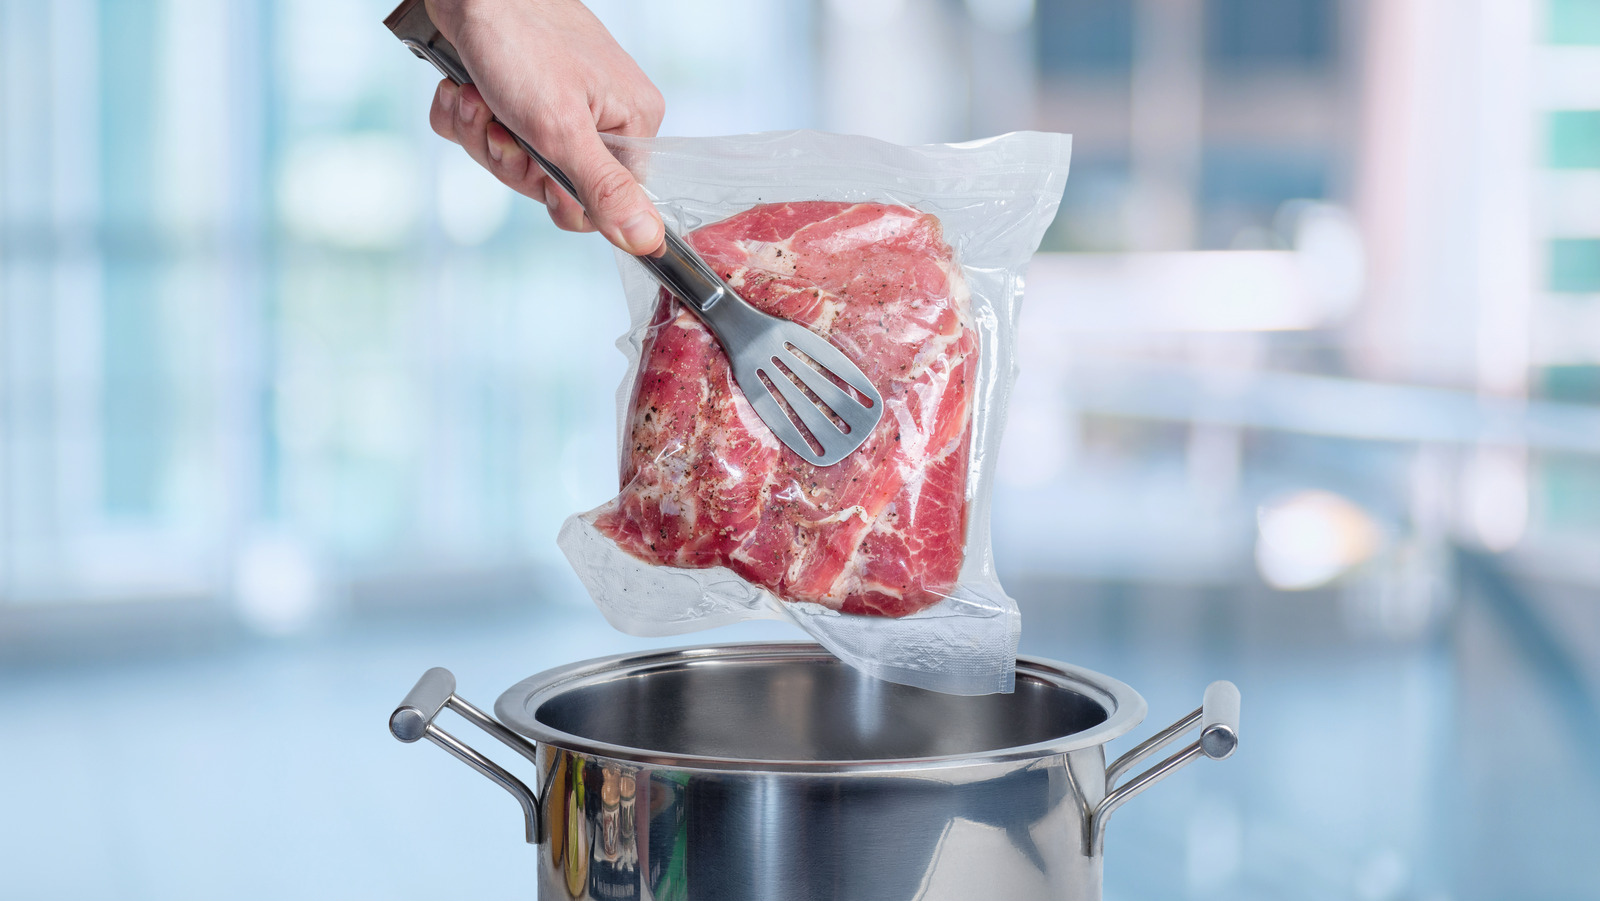 https://www.tastingtable.com/img/gallery/how-to-insulate-your-sous-vide-bath-for-longer-cooking/l-intro-1684249088.jpg